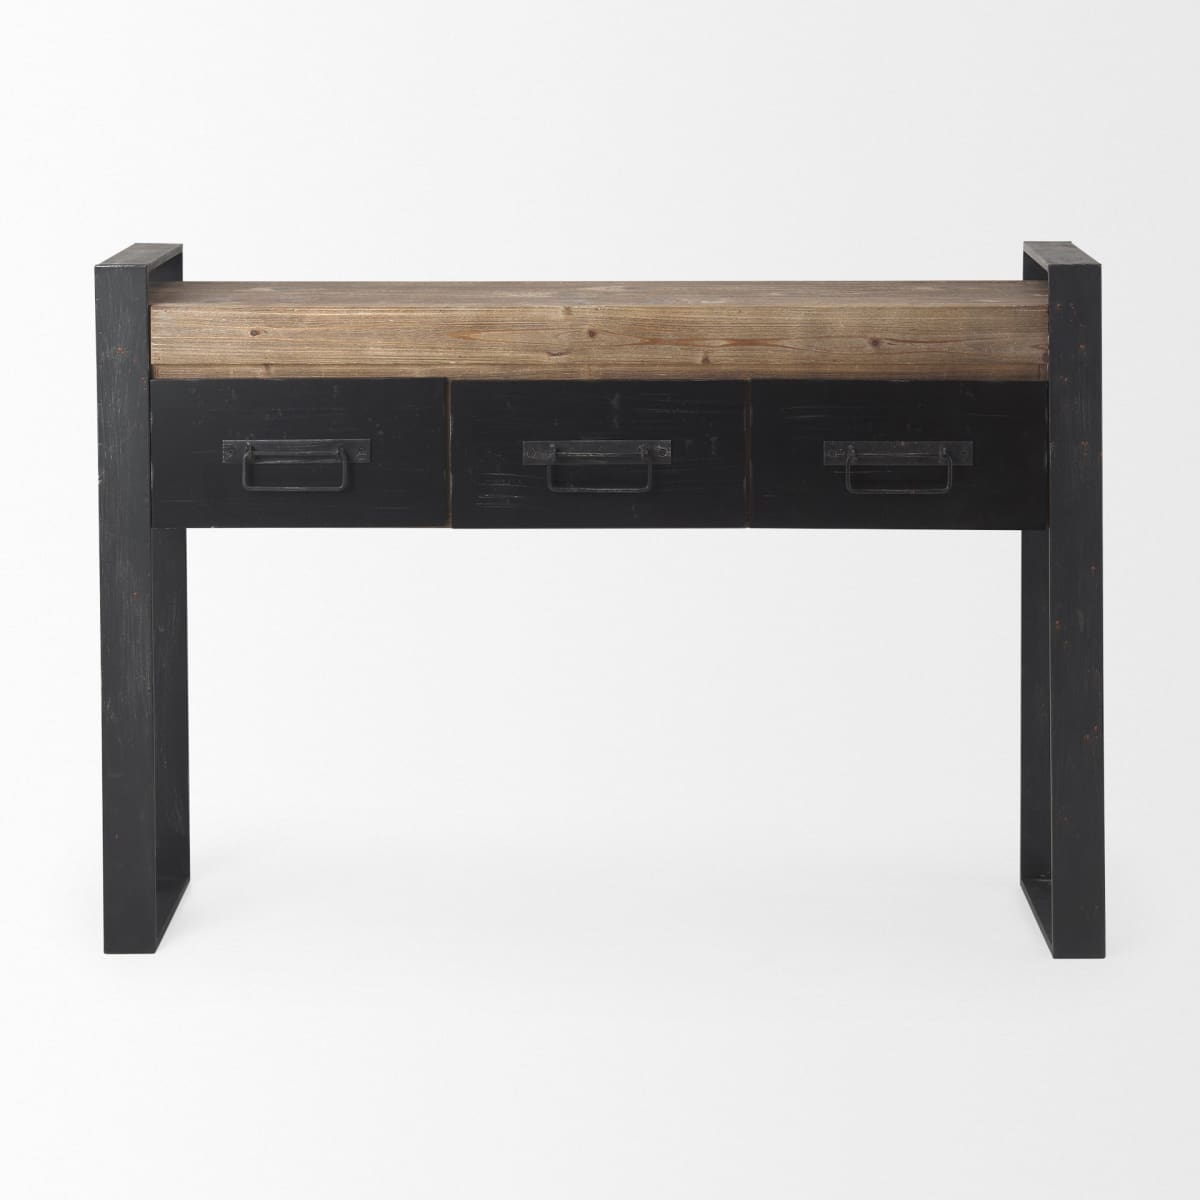 Carga Console Table Brown Wood | Black Metal - console-tables